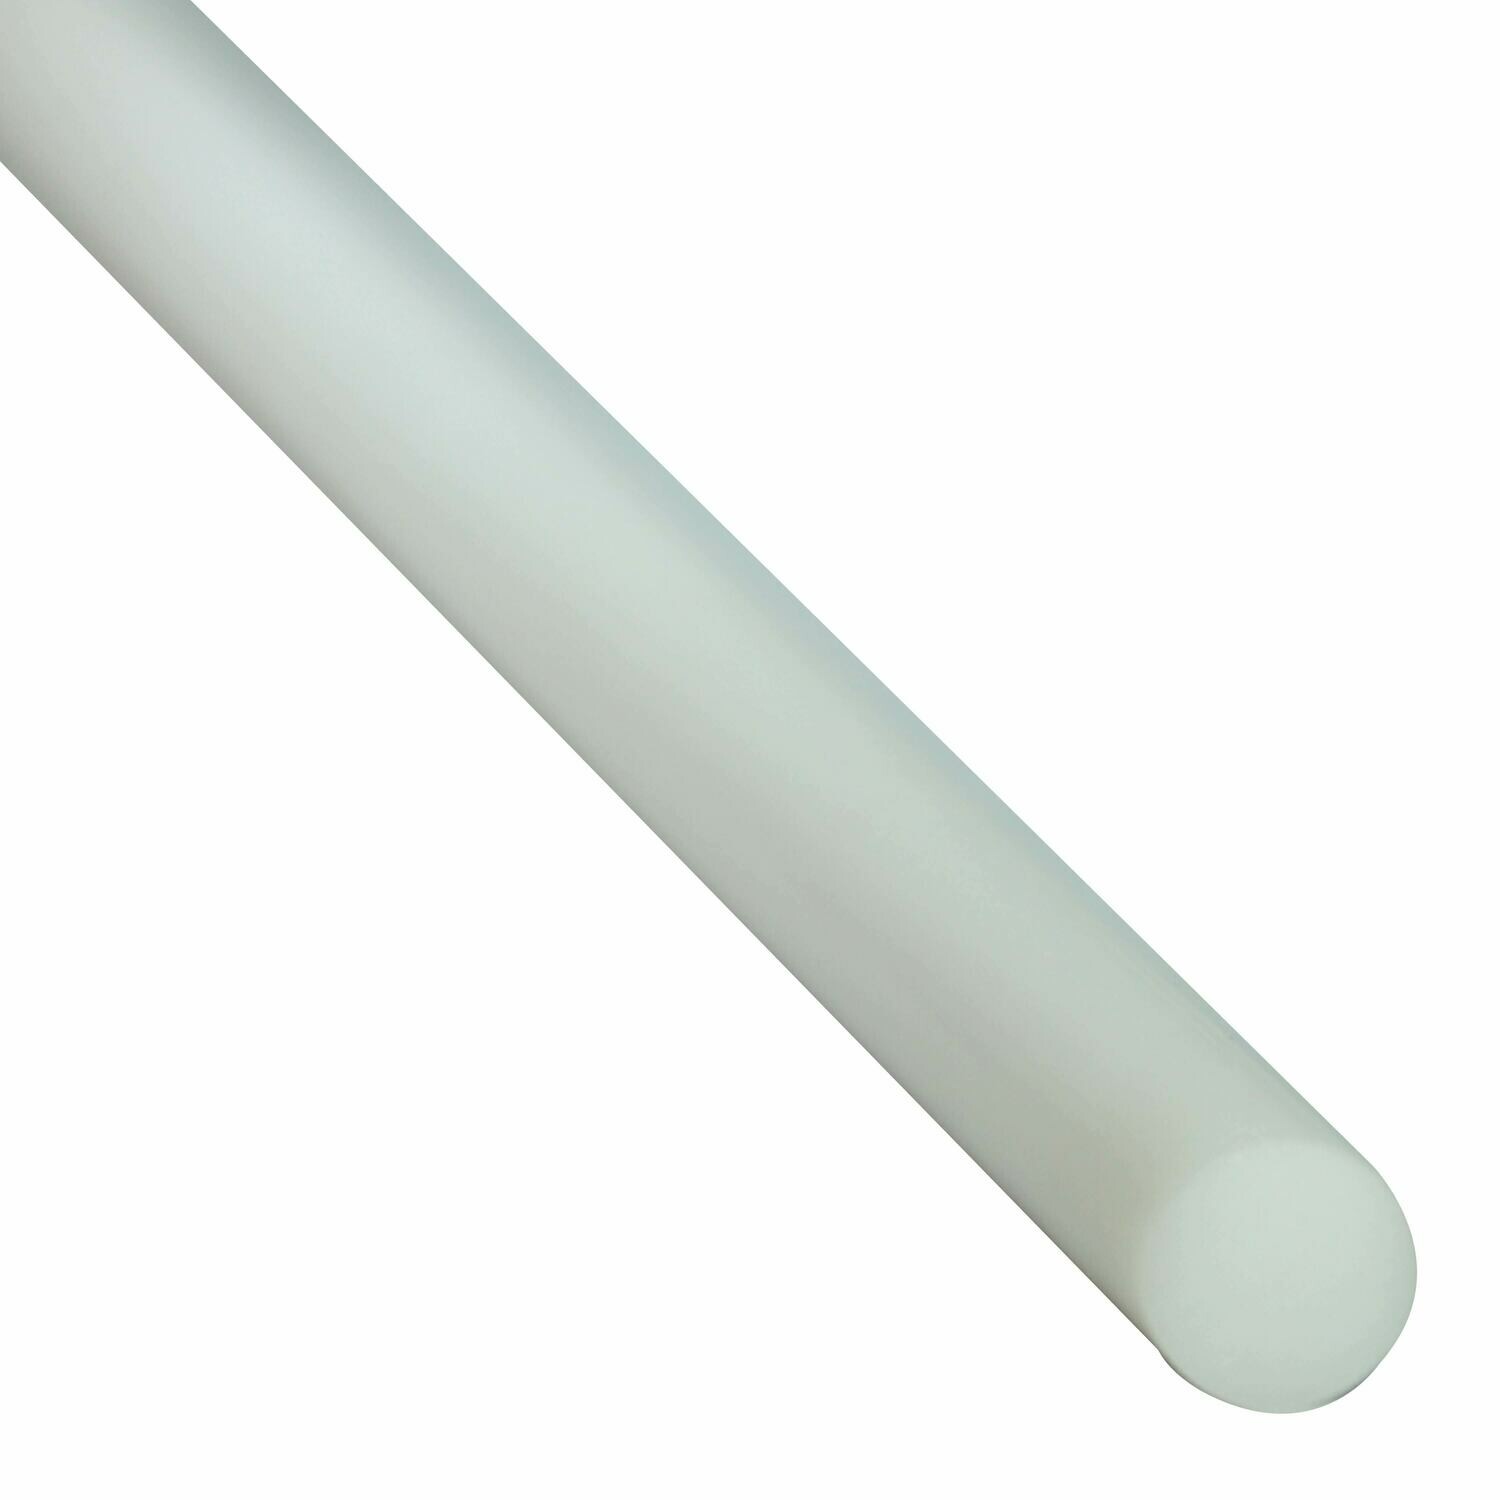 HDPE Rods